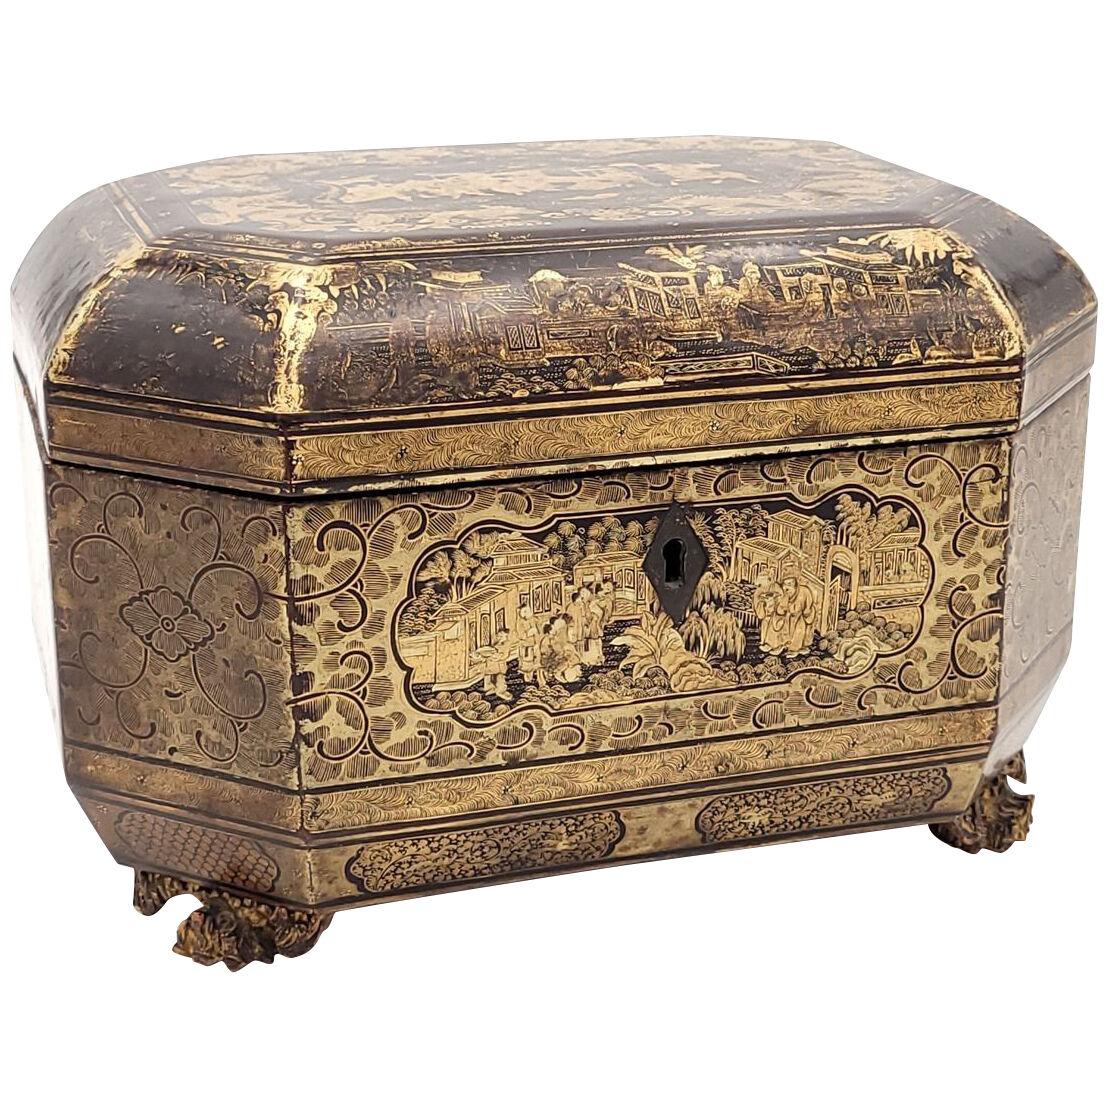 Rare Chinese Export Tea Caddy with Original Pewter Liners, circa 1820